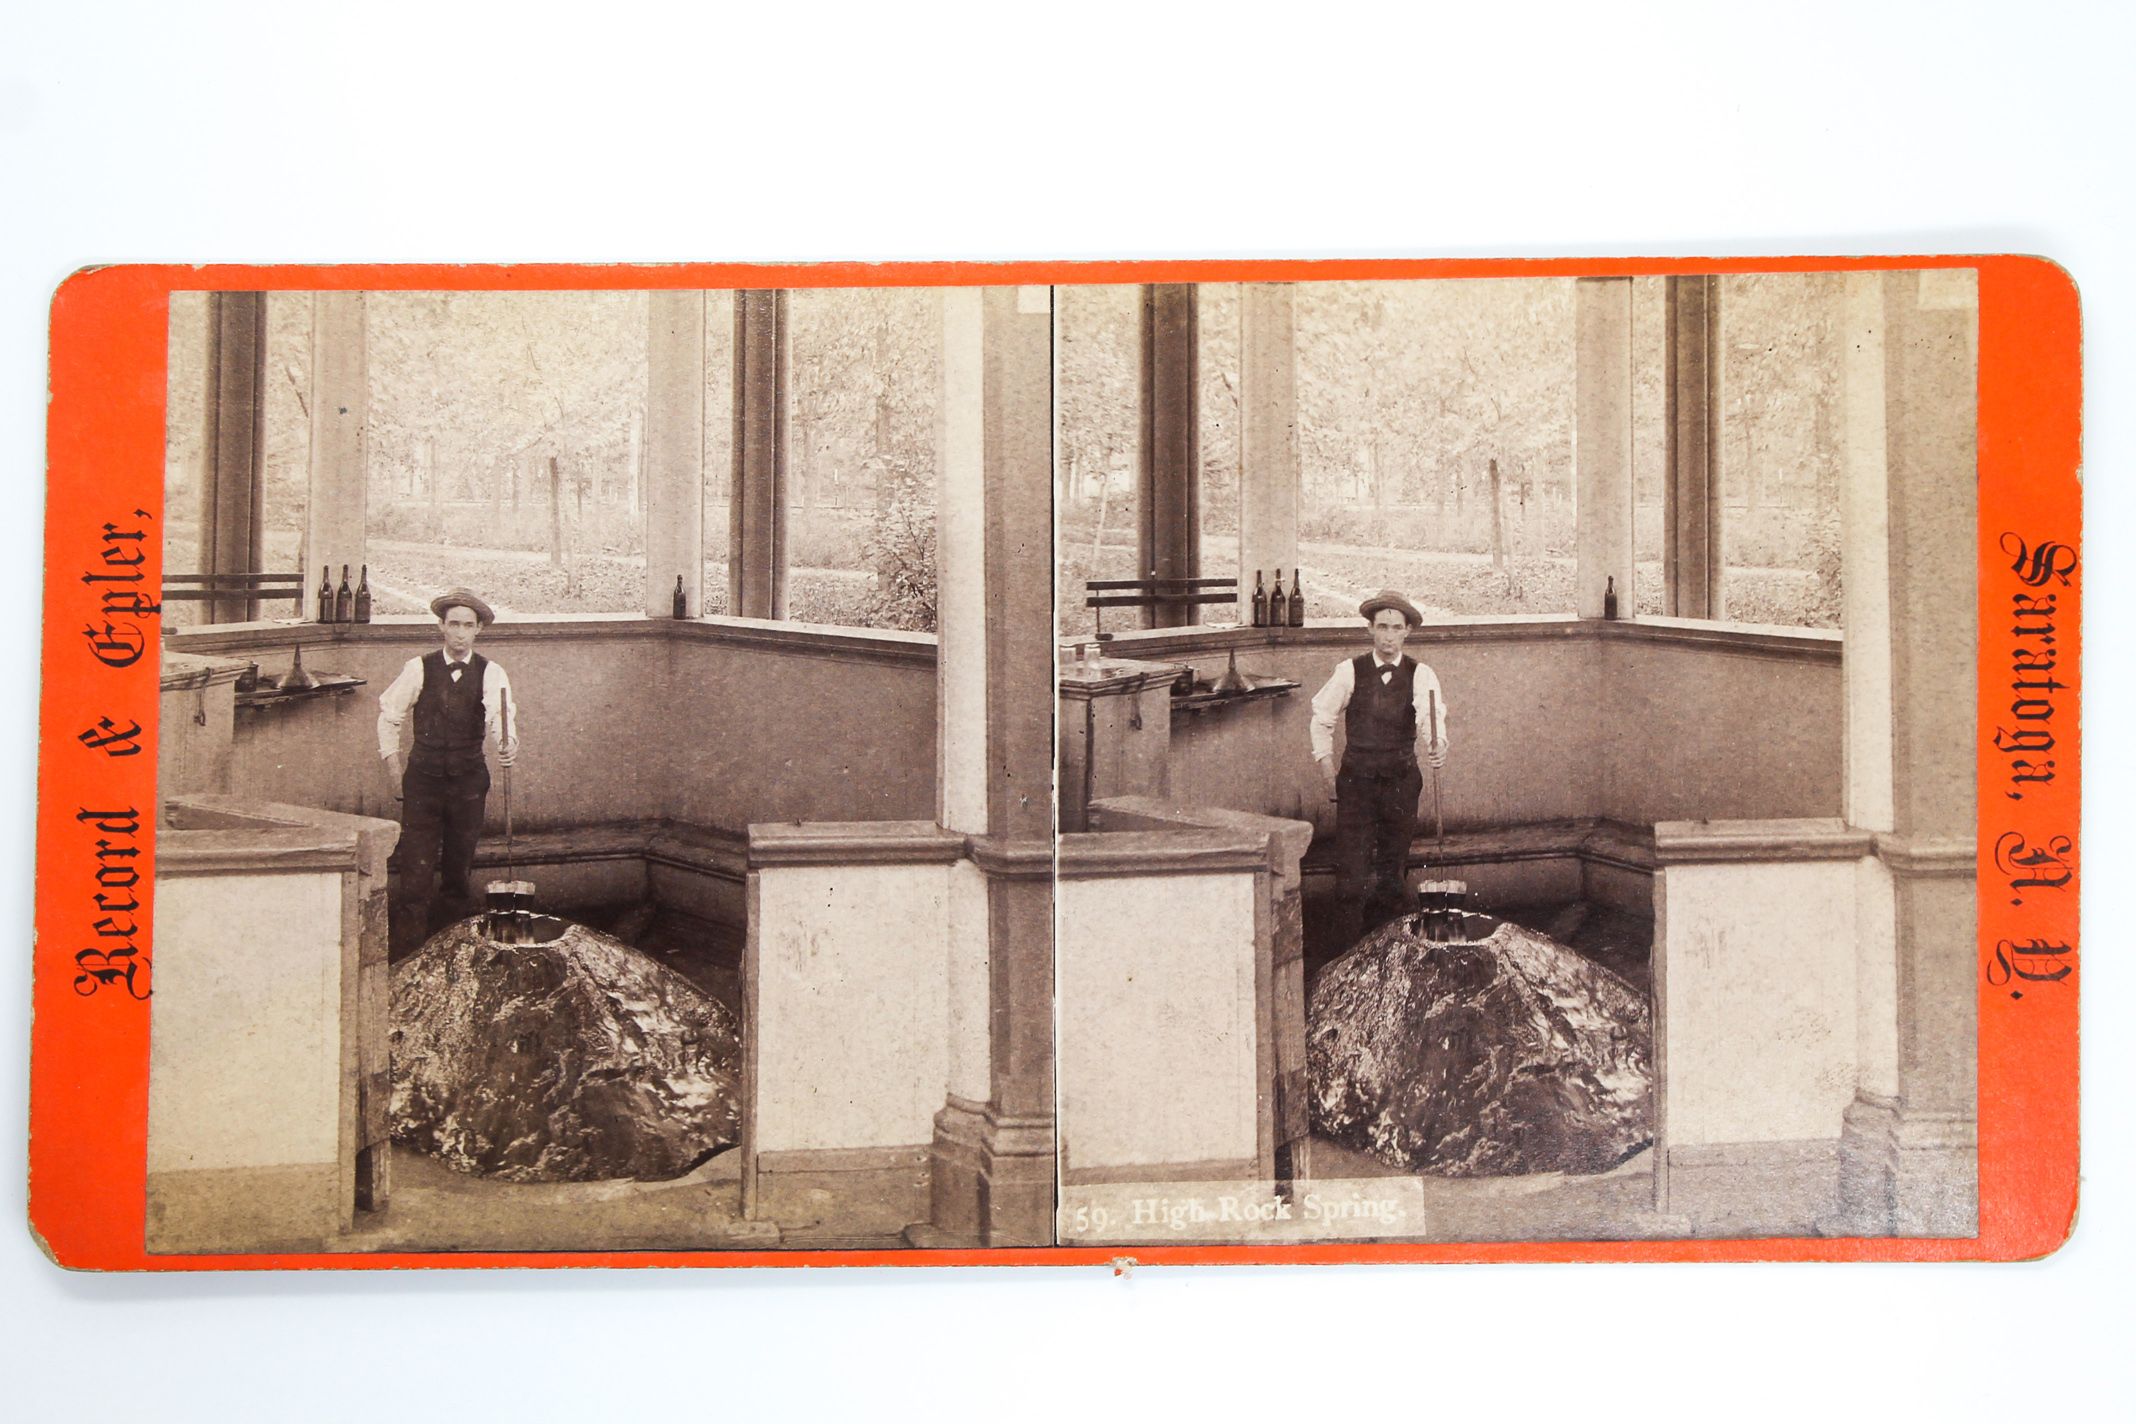 Stereoview of the High Rock Spring in Saratoga Springs